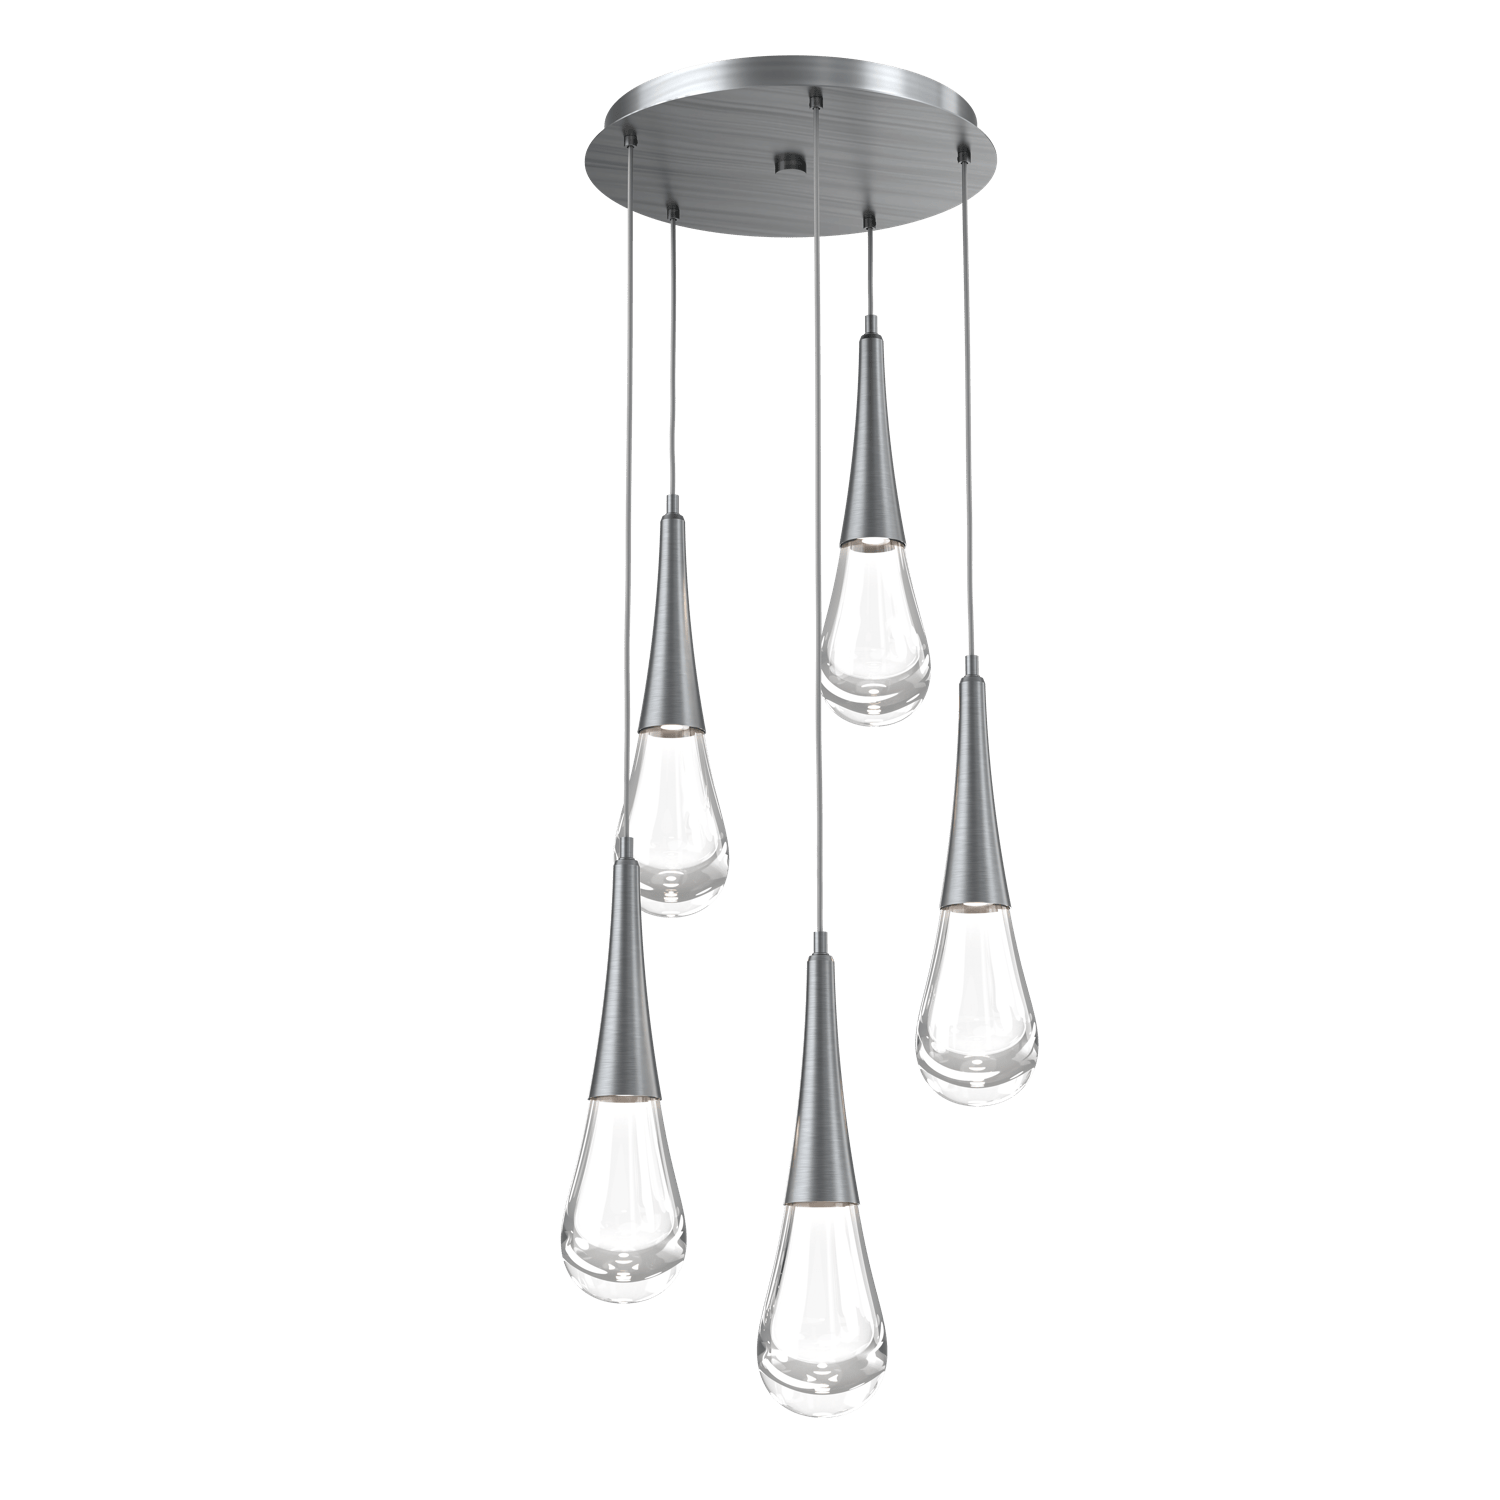 CHB0078-05-GM-Hammerton-Studio-Raindrop-5-light-round-pendant-chandelier-with-gunmetal-finish-and-clear-blown-glass-shades-and-LED-lamping